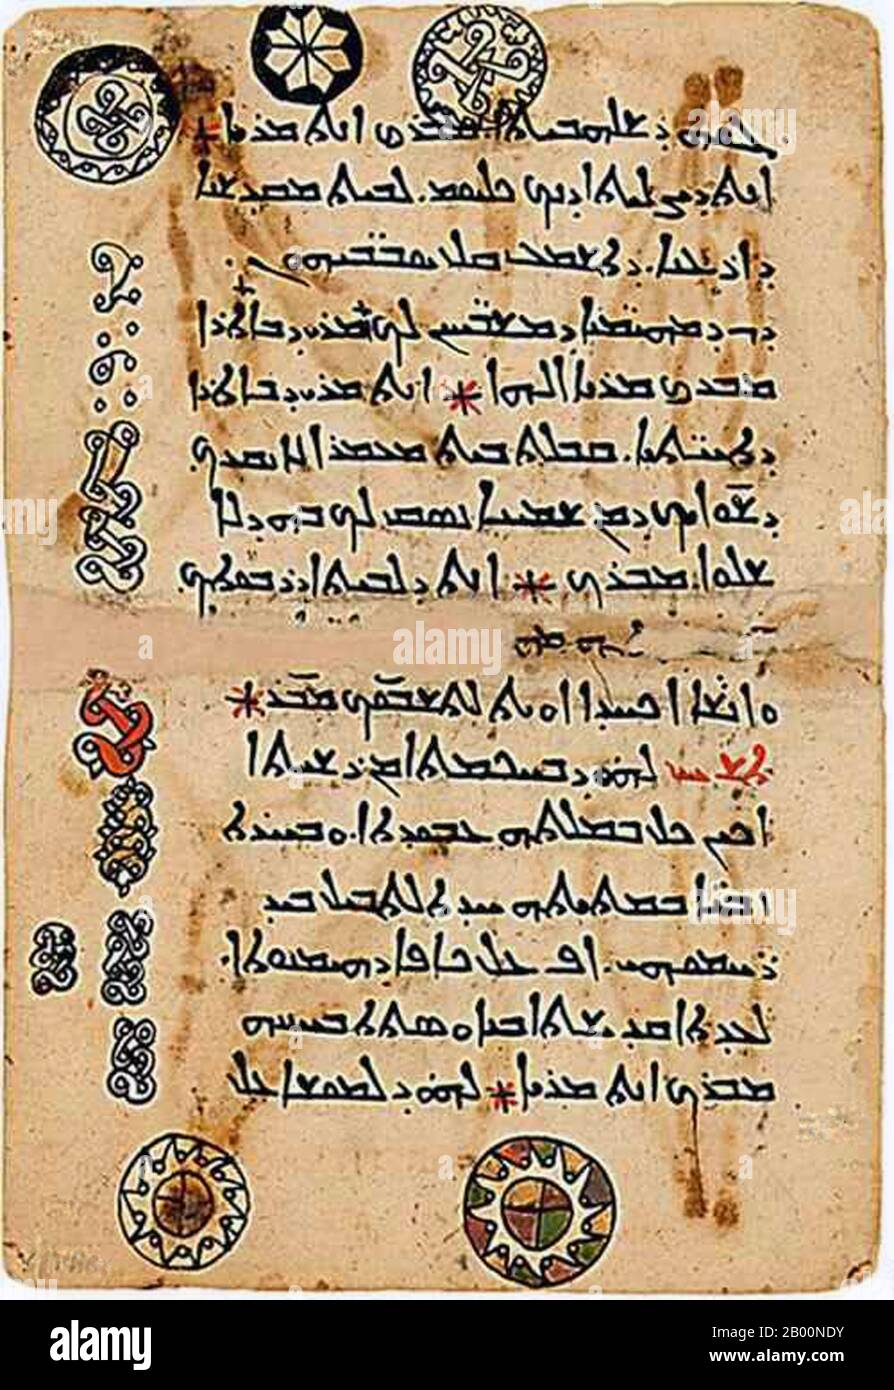 Egypt: Syriac script. Mount Sinai, 11th century.  Syriac (ܠܫܢܐ ܣܘܪܝܝܐ Leššānā Suryāyā) is a dialect of Middle Aramaic that was once spoken across much of the Fertile Crescent and Eastern Arabia.  Having first appeared as a script in the 1st century CE after being spoken as an unwritten language for five centuries, Classical Syriac became a major literary language throughout the Middle East from the 4th to the 8th centuries, the classical language of Edessa, preserved in a large body of Syriac literature. Stock Photo